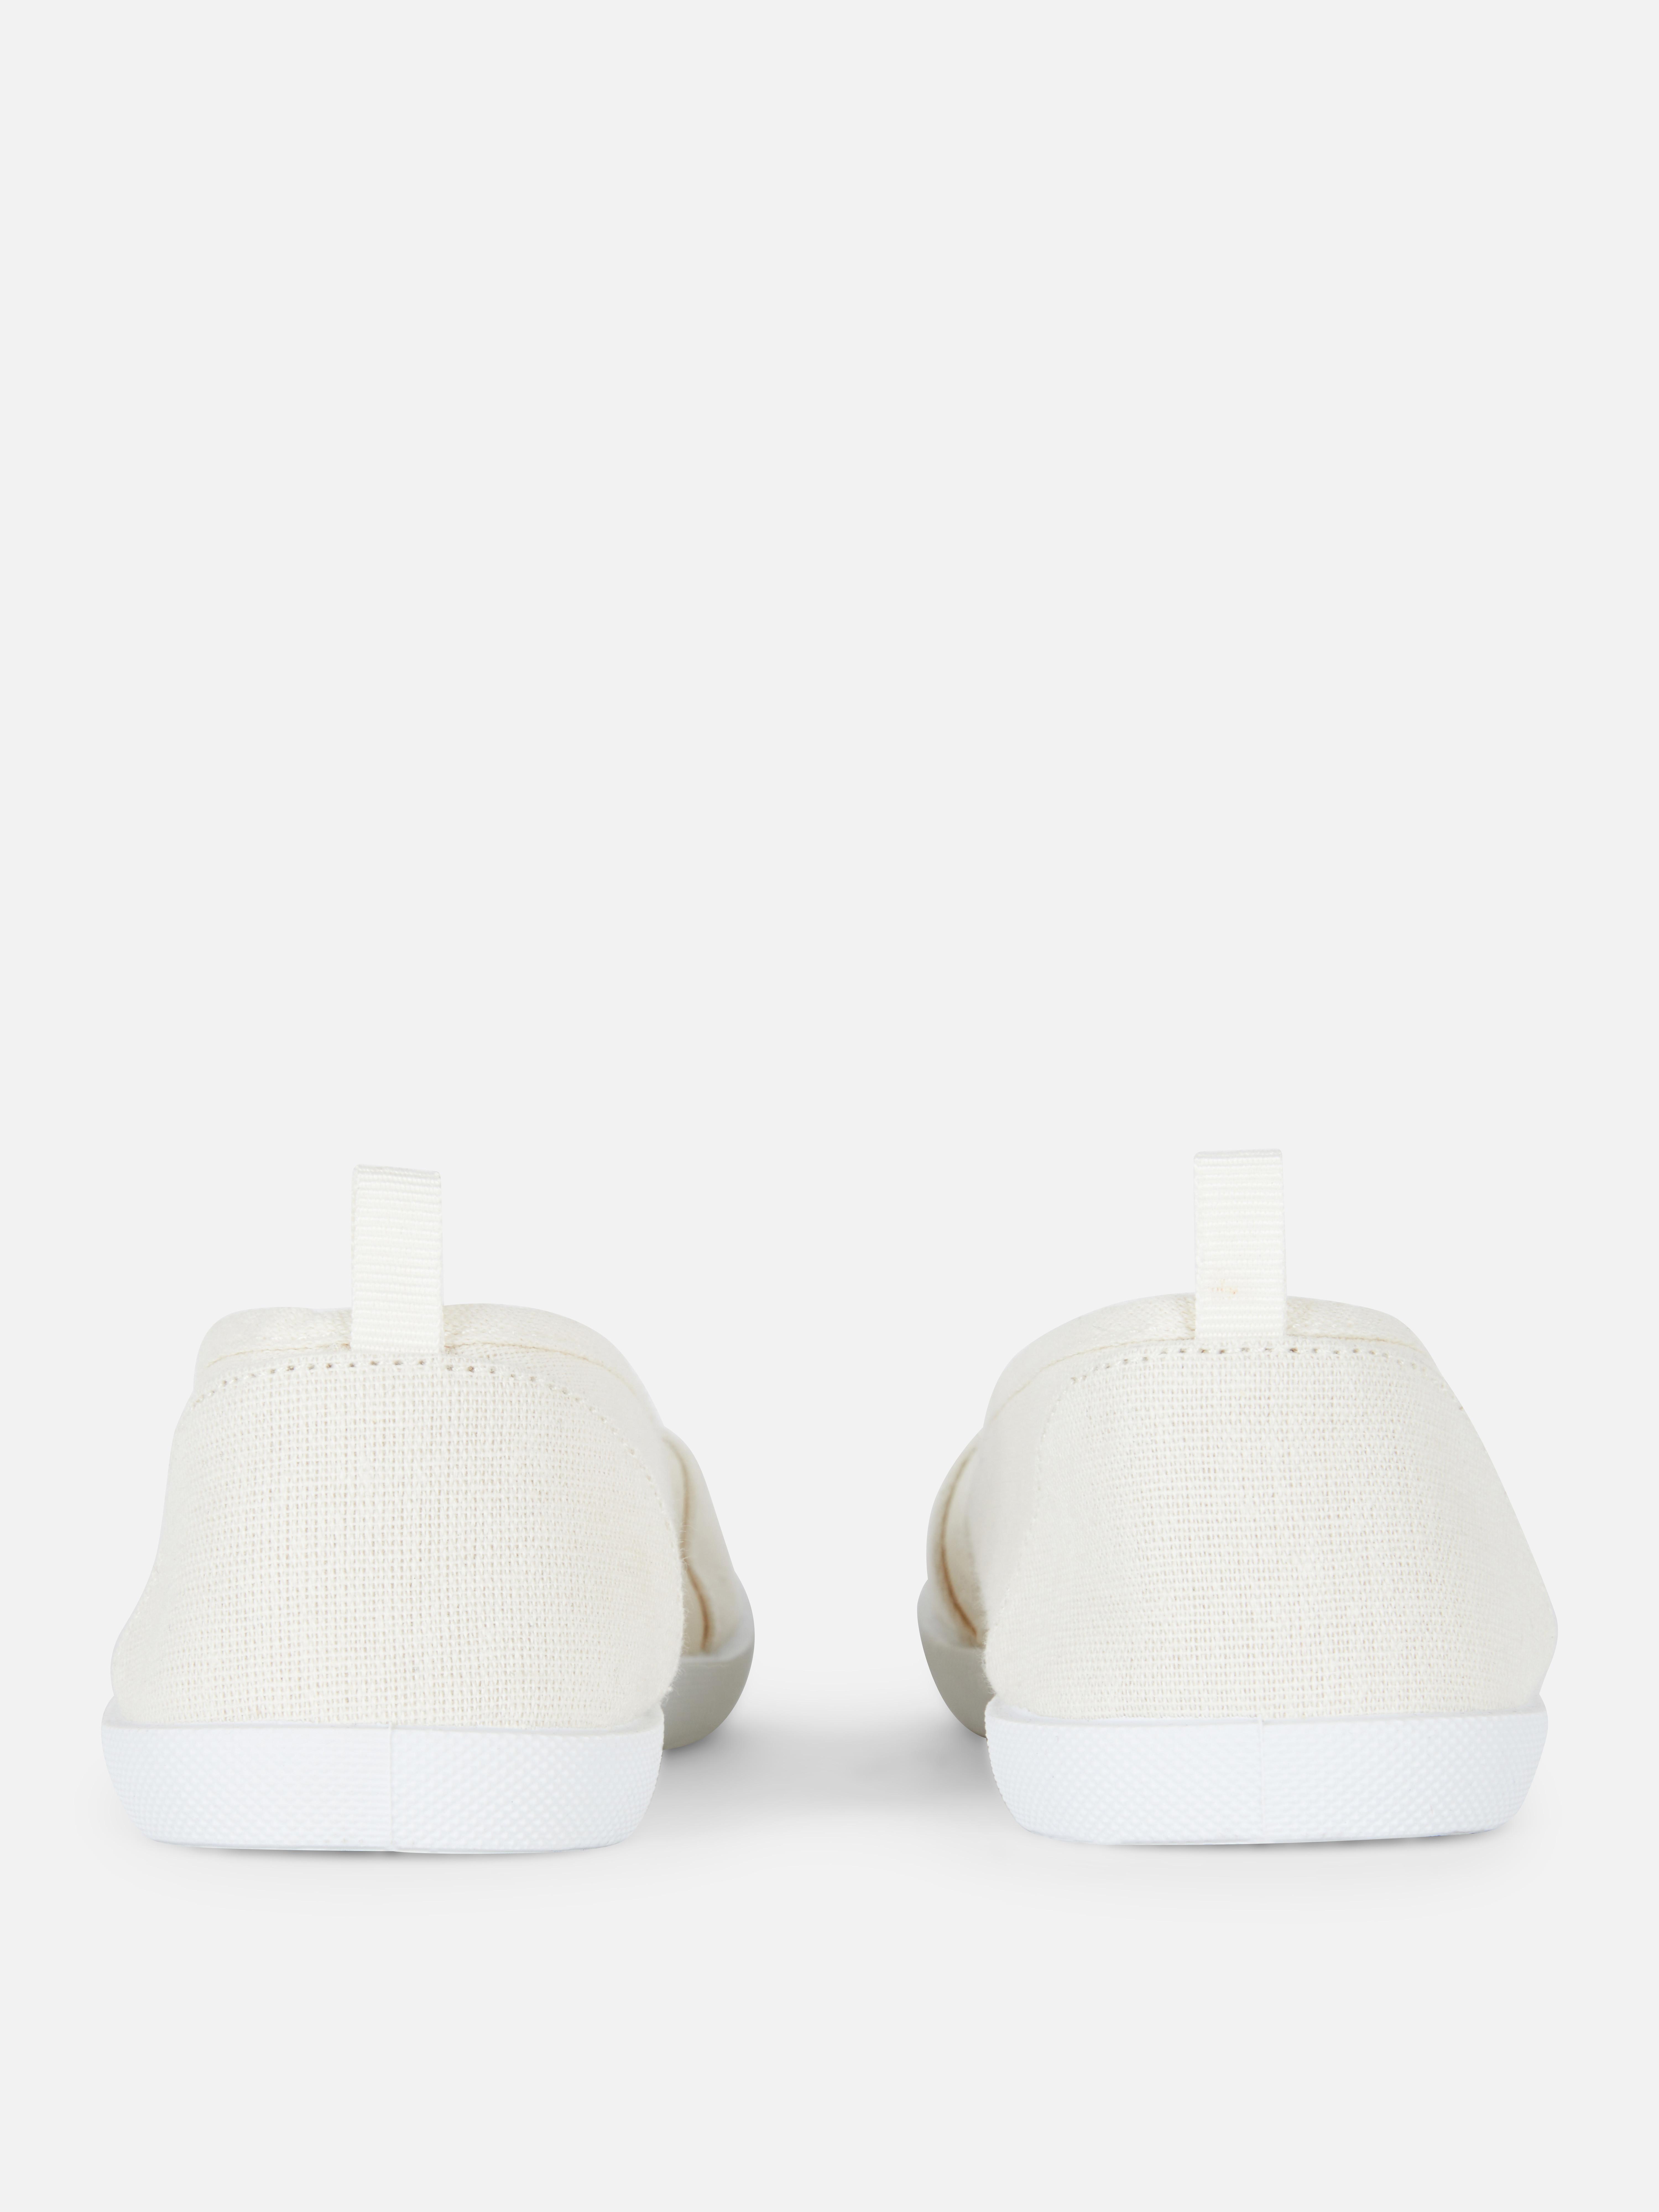 Canvas Slip-On Shoes